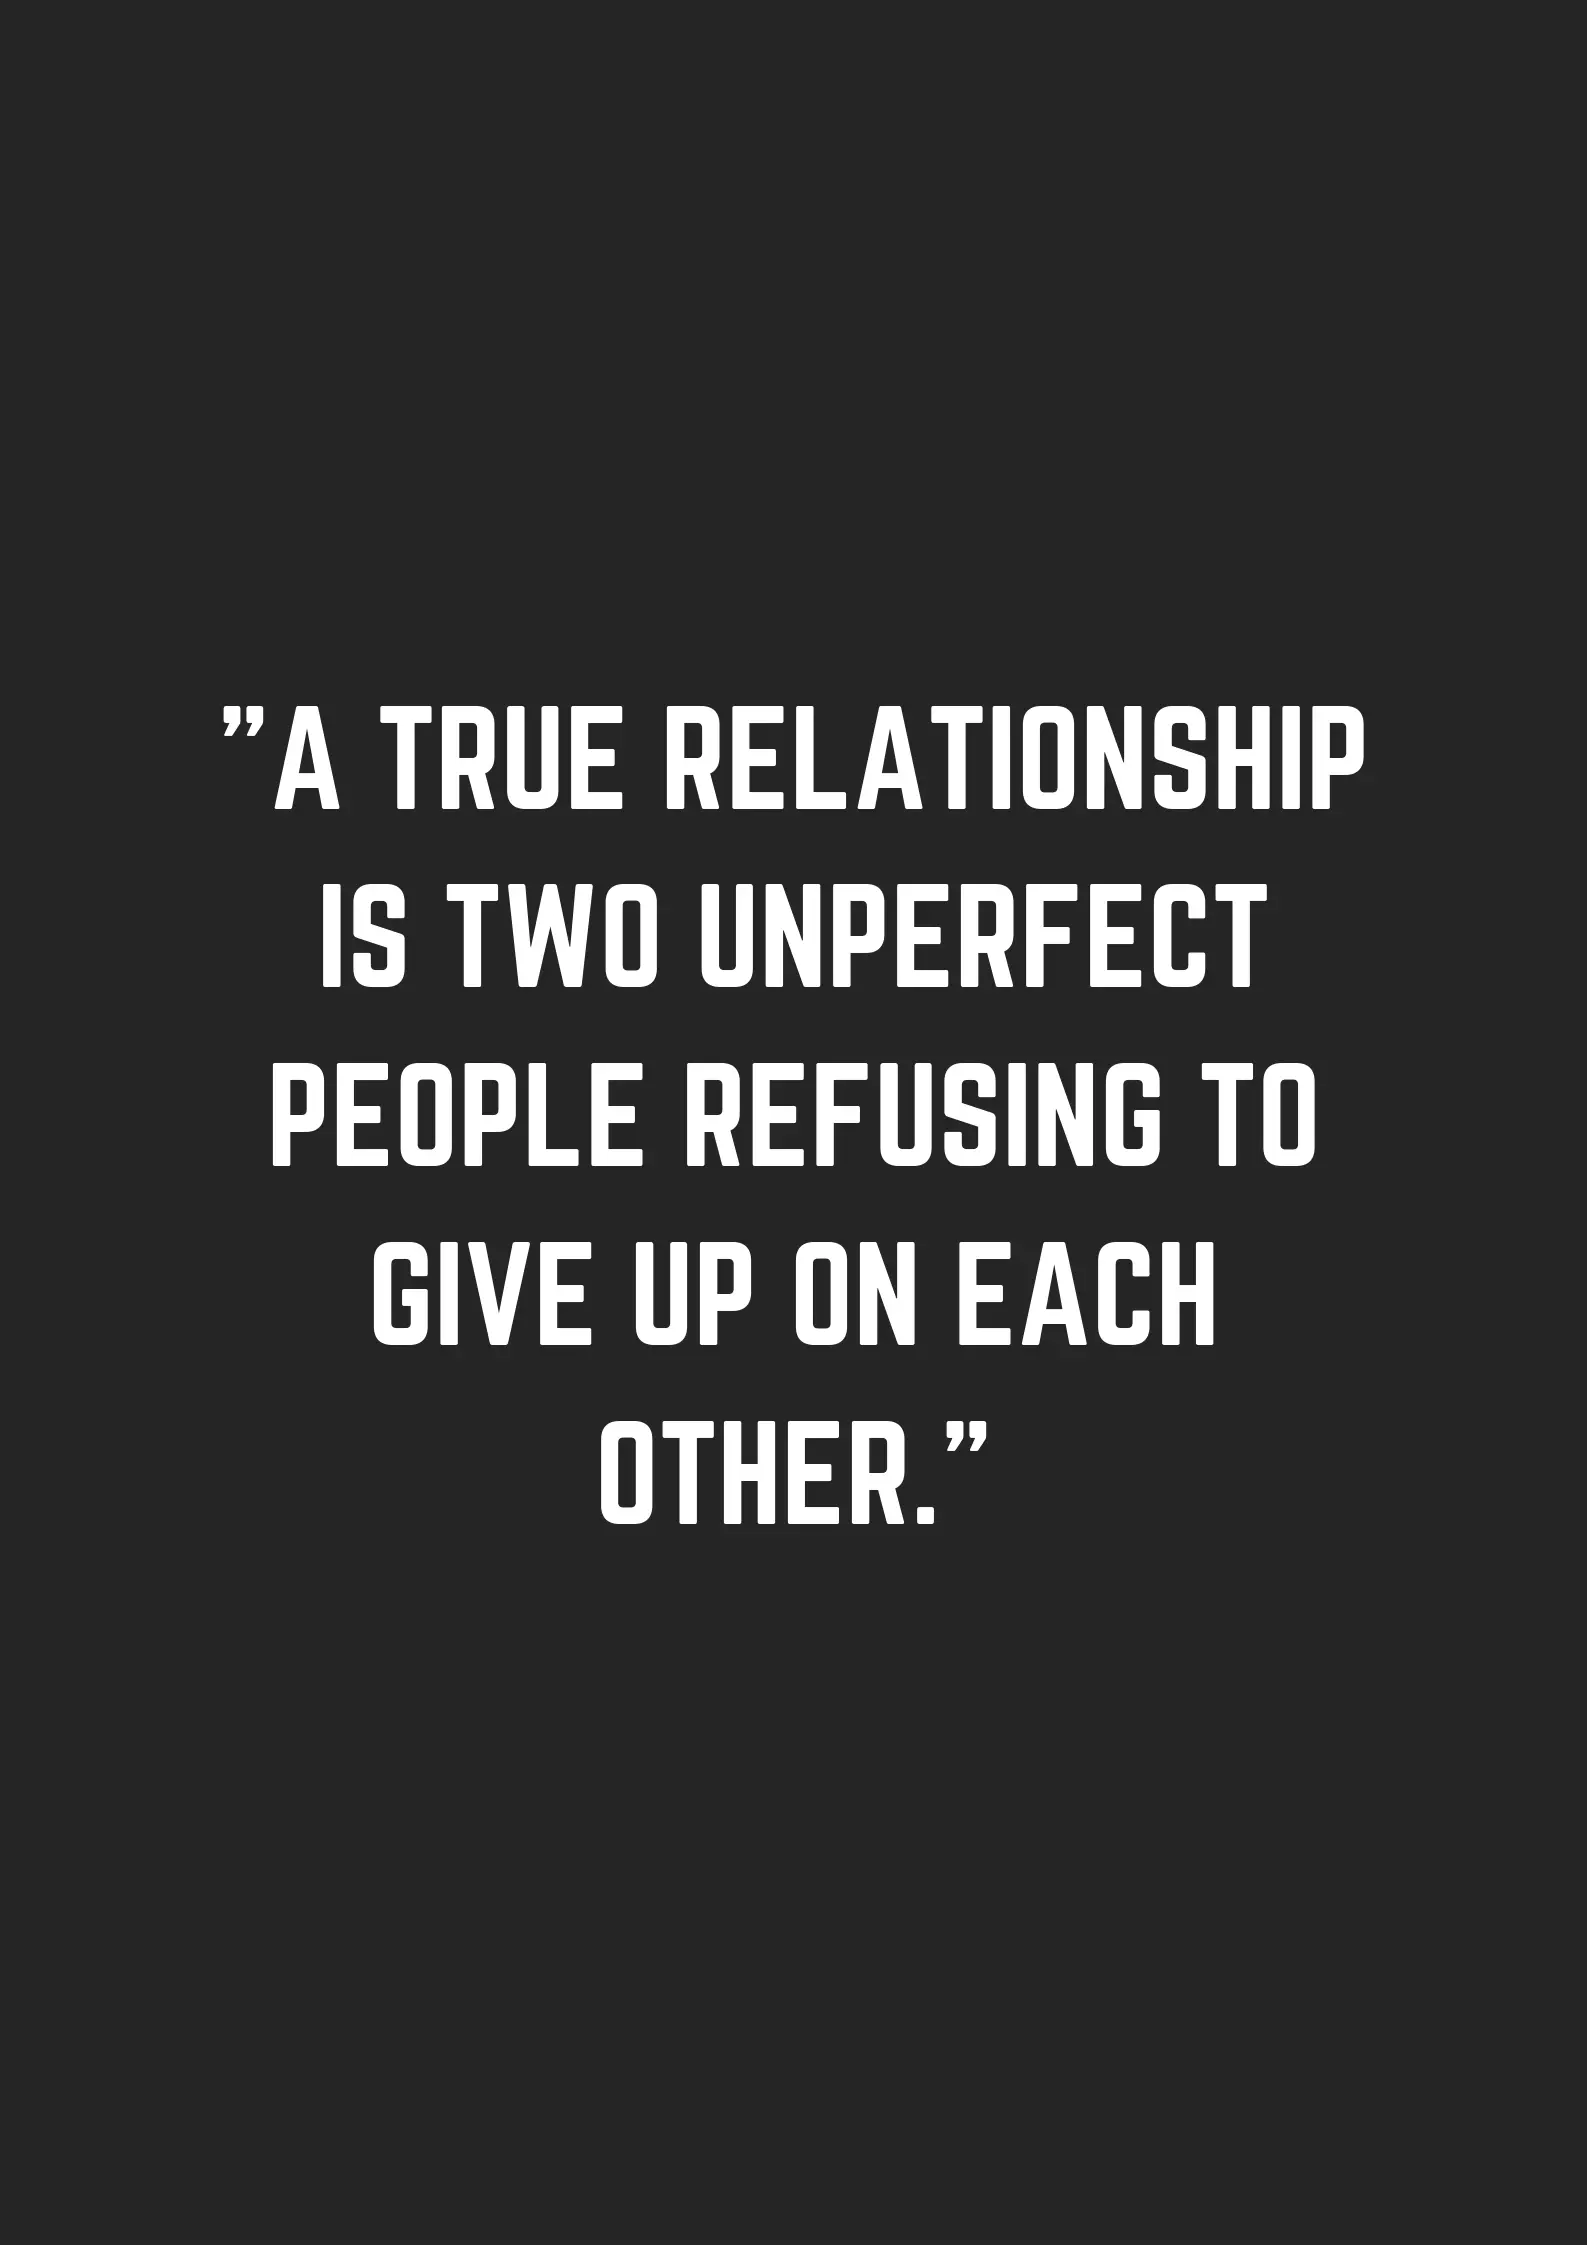 20 Love Quotes To Remind You To Stay Together - Even When Times Get ...